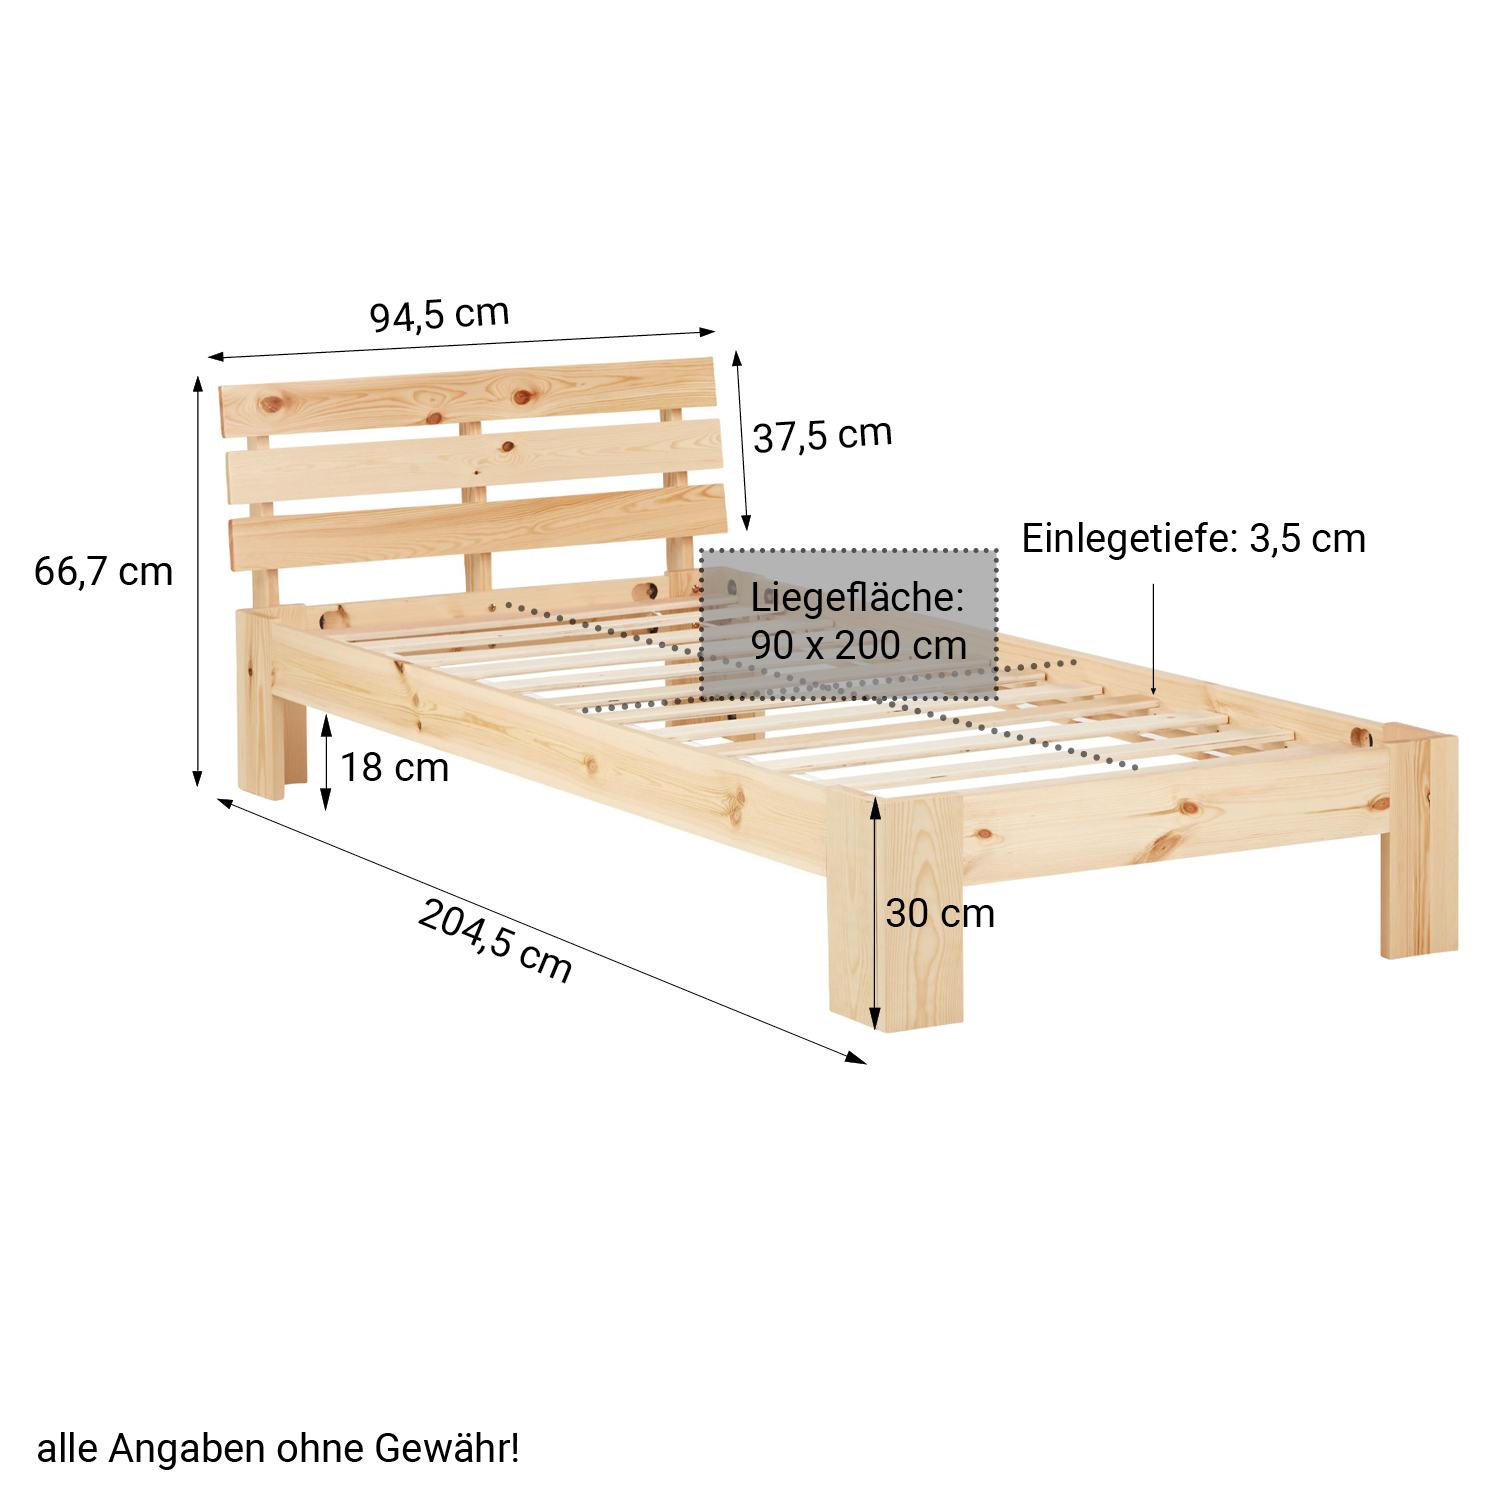 Single Bed Wooden Bed 90x200 with Slatted Frame Natural Pine Bed Bedstead Solid Wood